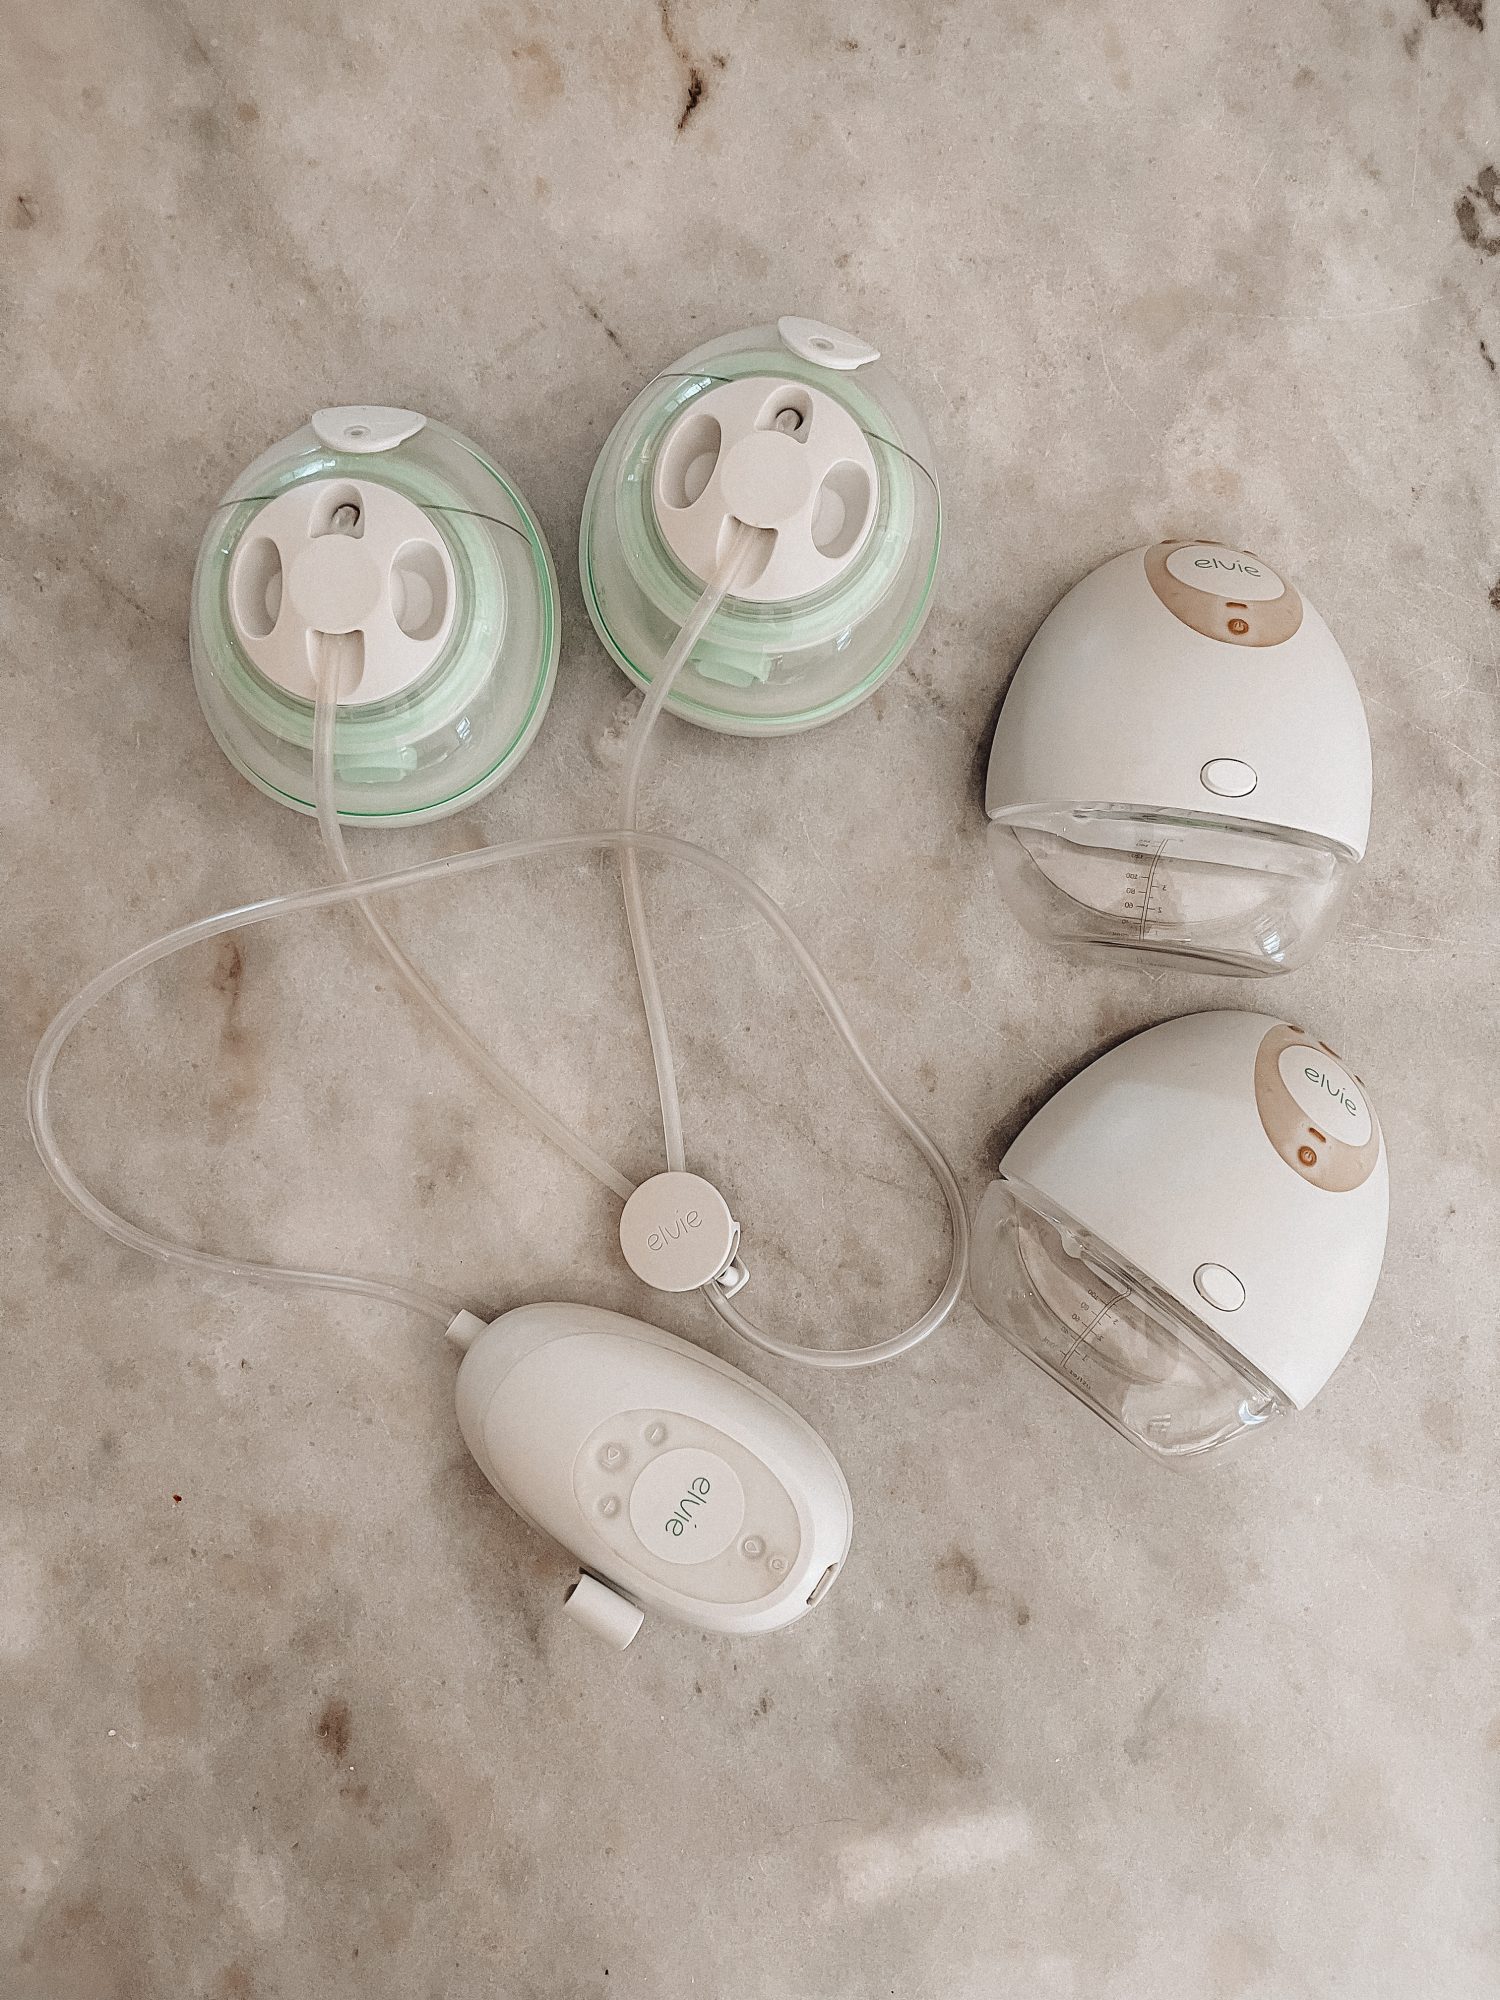 Elvie Pump Review: Hands-Free, Wearable Pump That Reduced My Pumping Time